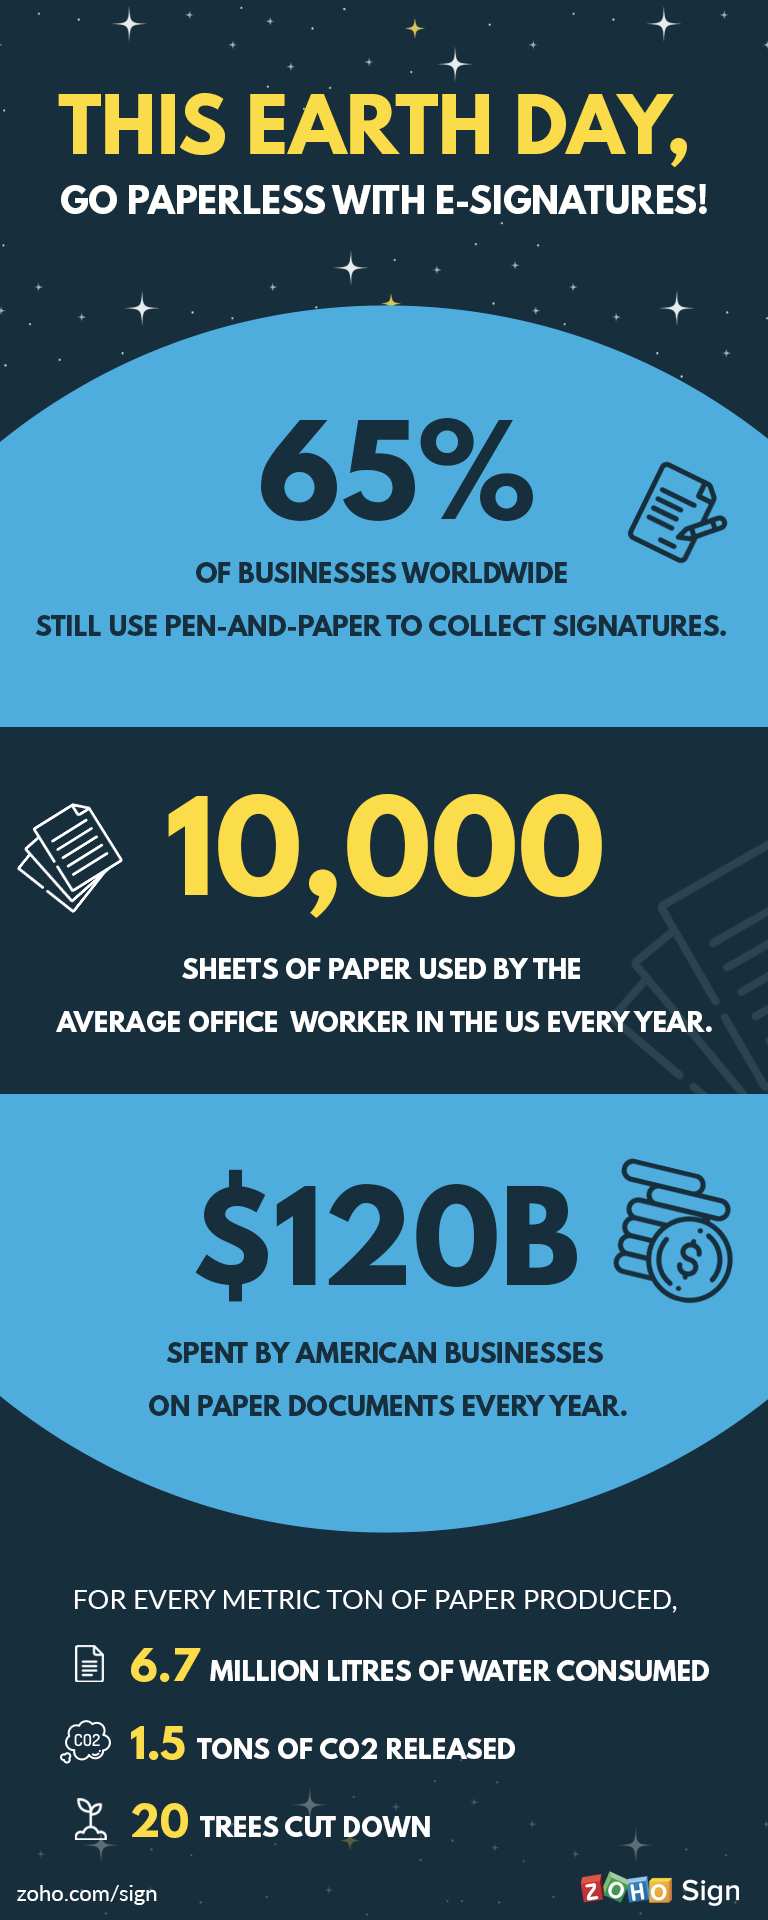 This Earth Day, go paperless with e-signatures!